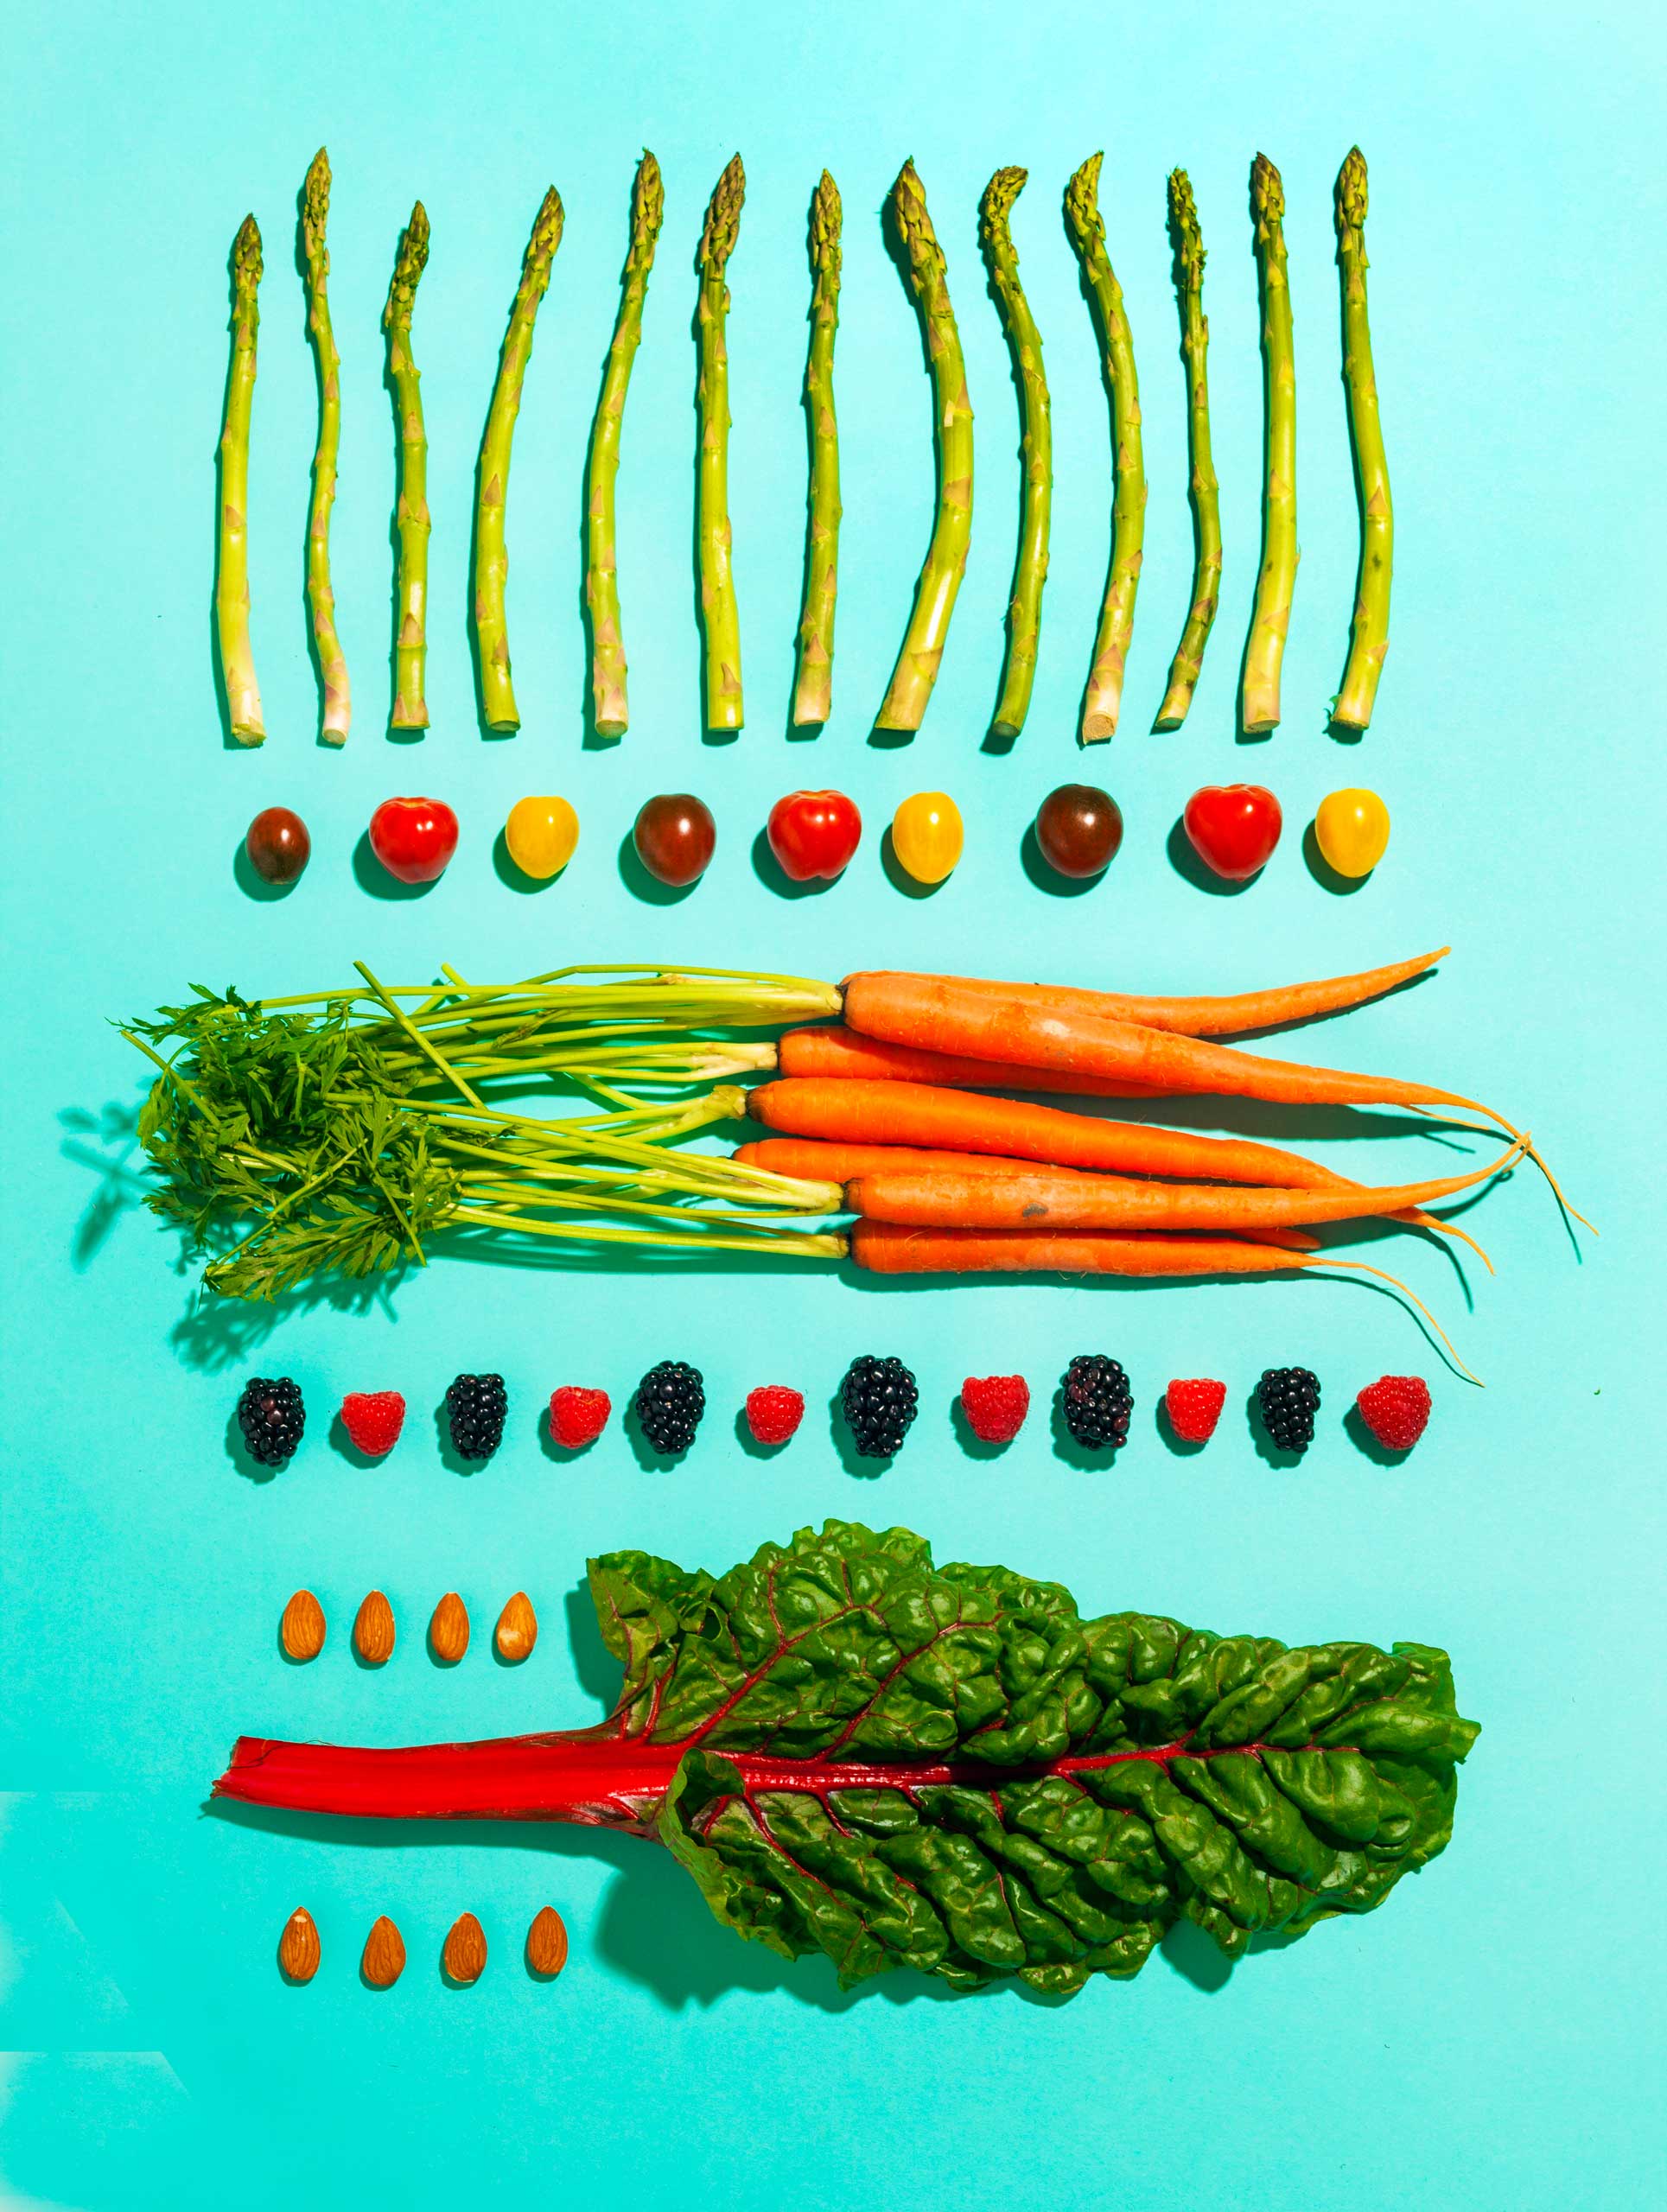 TIME.com stock photos Food Healthy Vegetables Chard Carrots